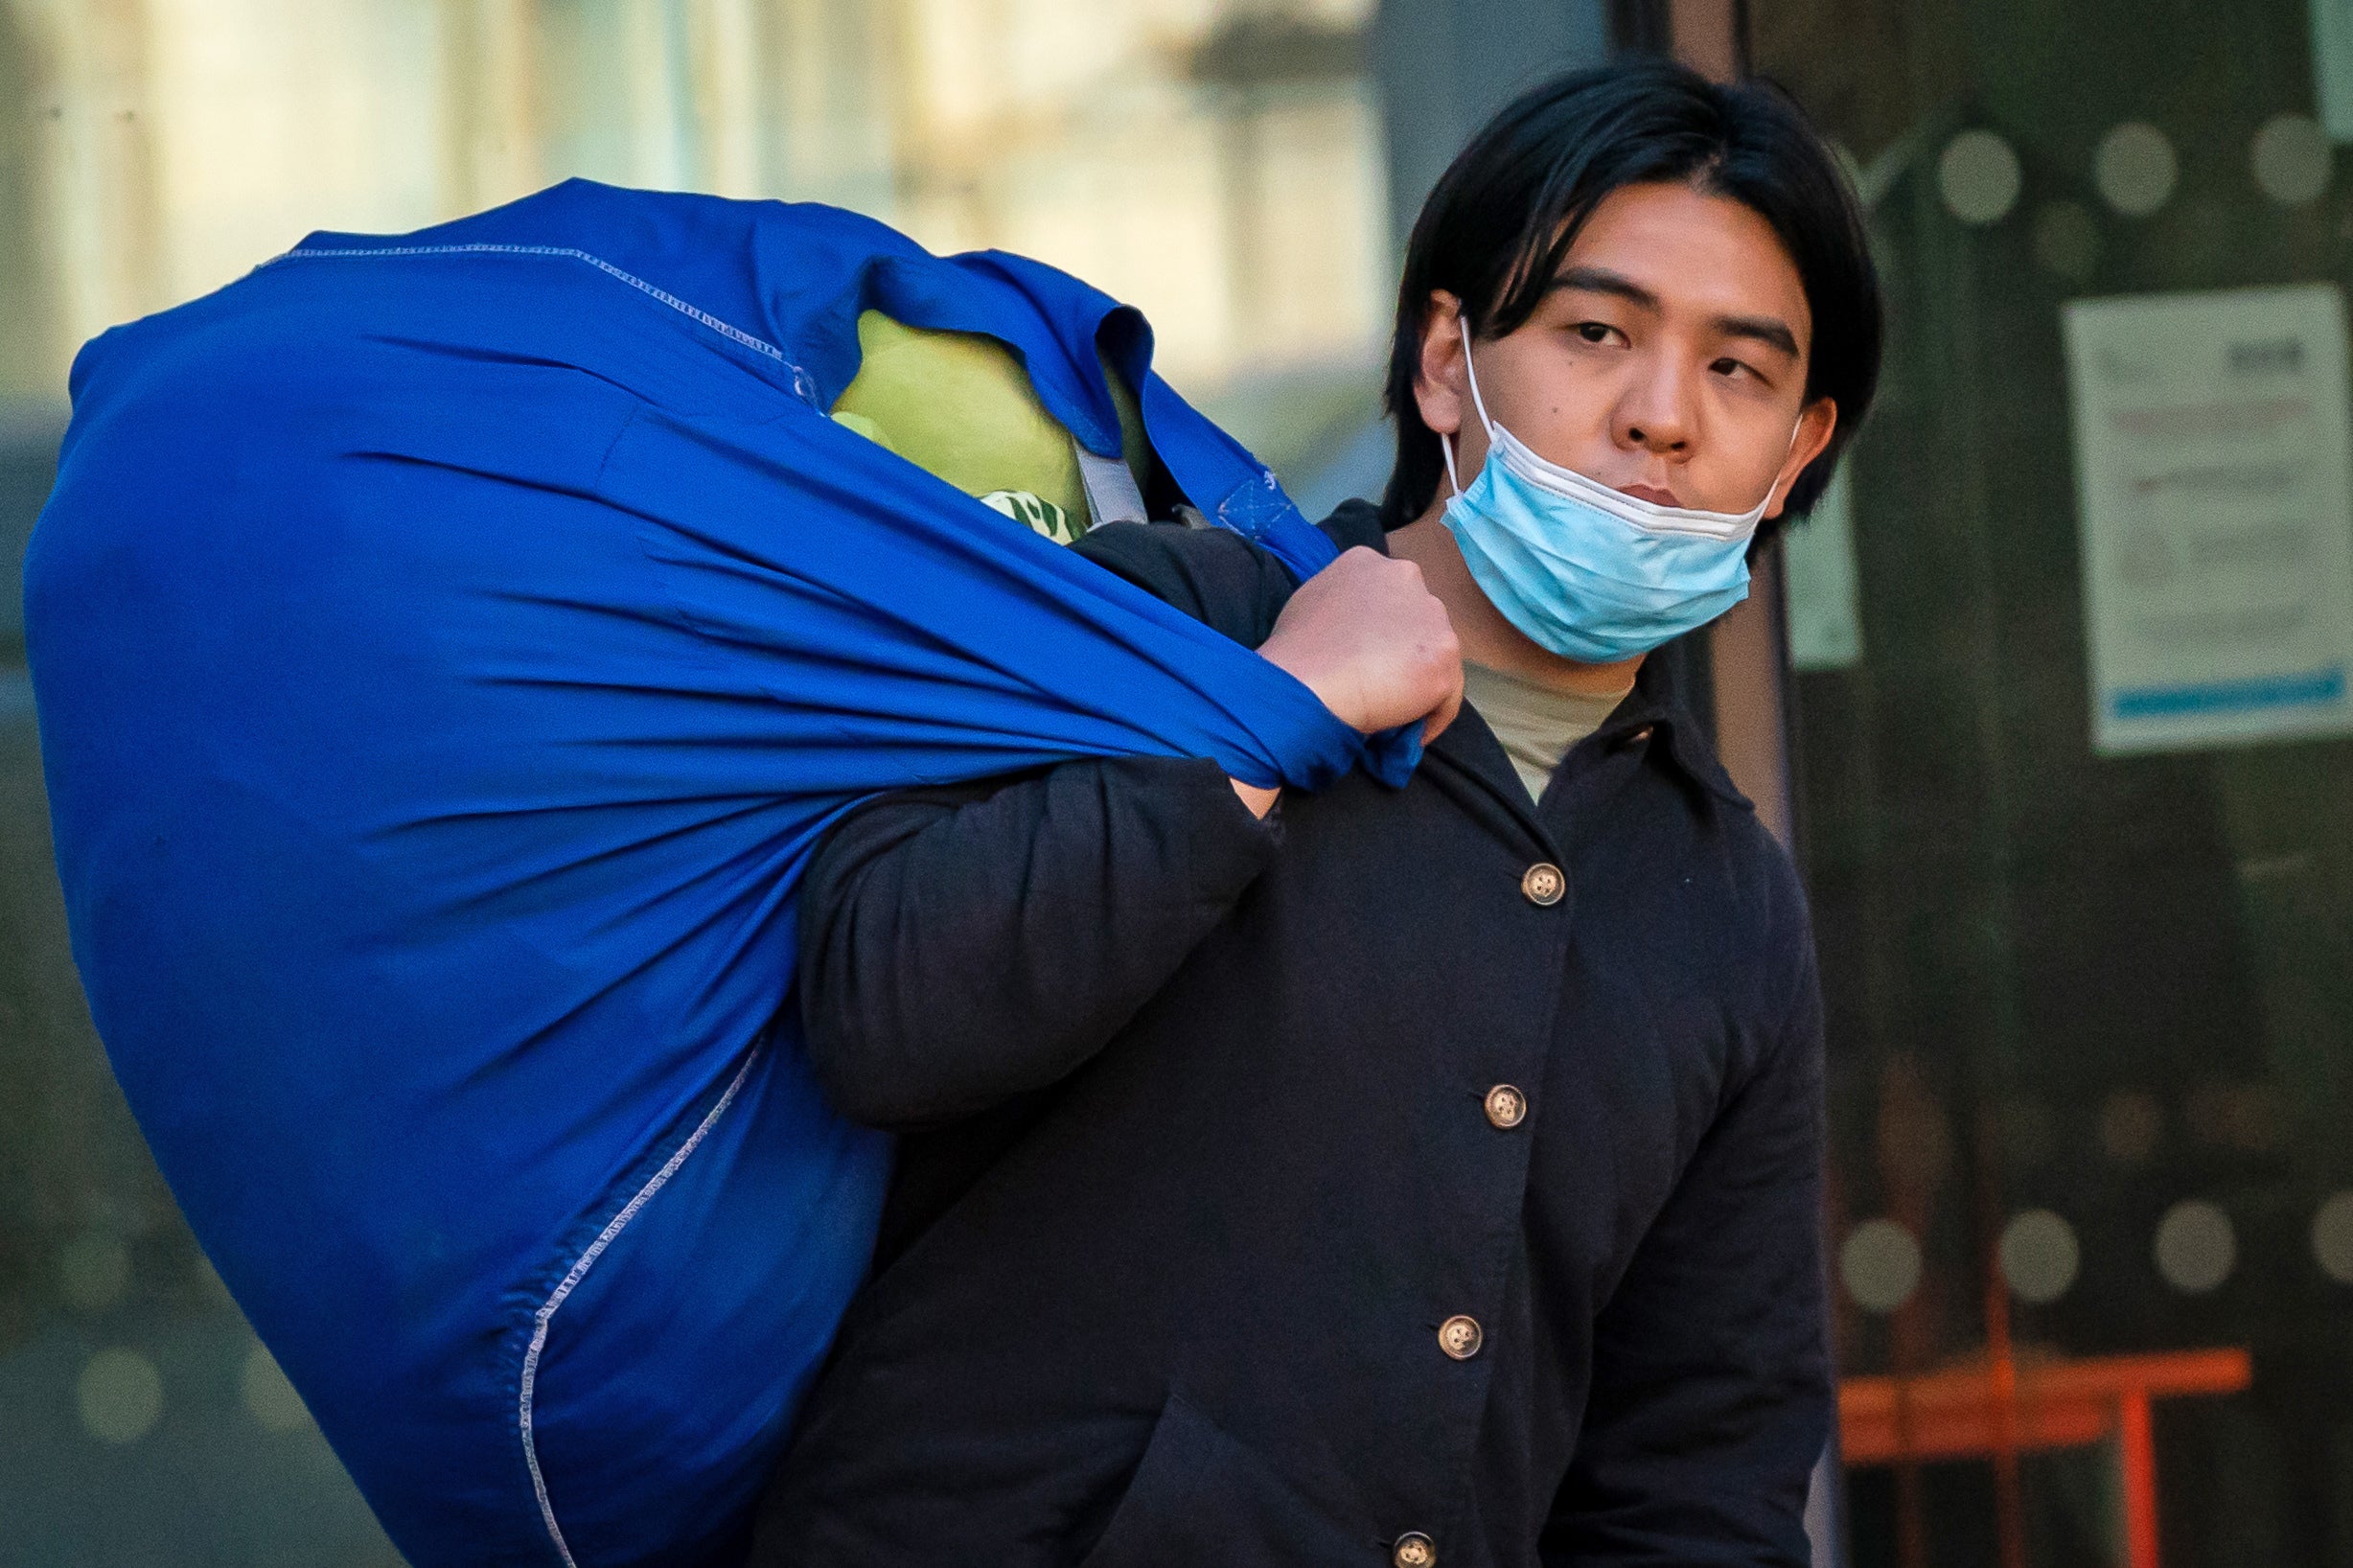 Joseph Huang Kang, 24, outside Westminster Magistrates’ Court (Aaron Chown/PA)